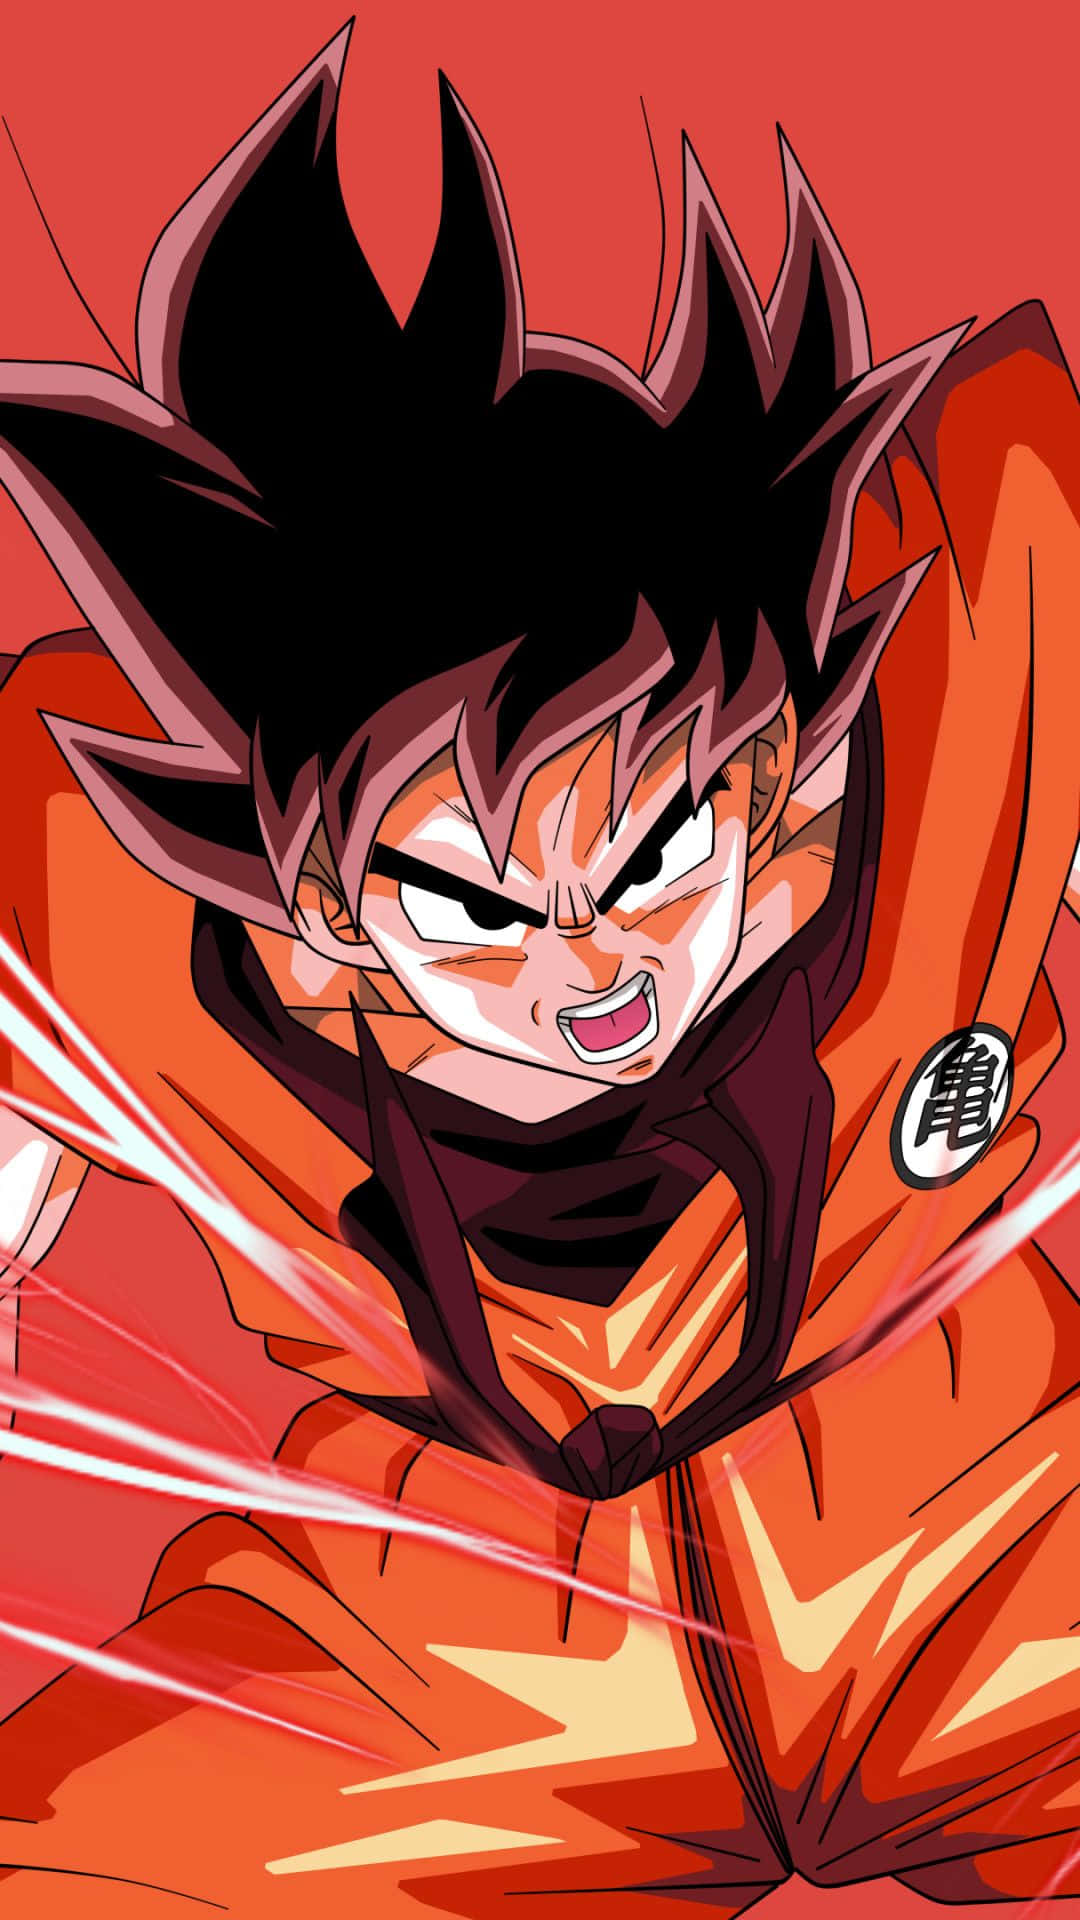 Unlock new power levels with the Dragon Ball Iphone" Wallpaper